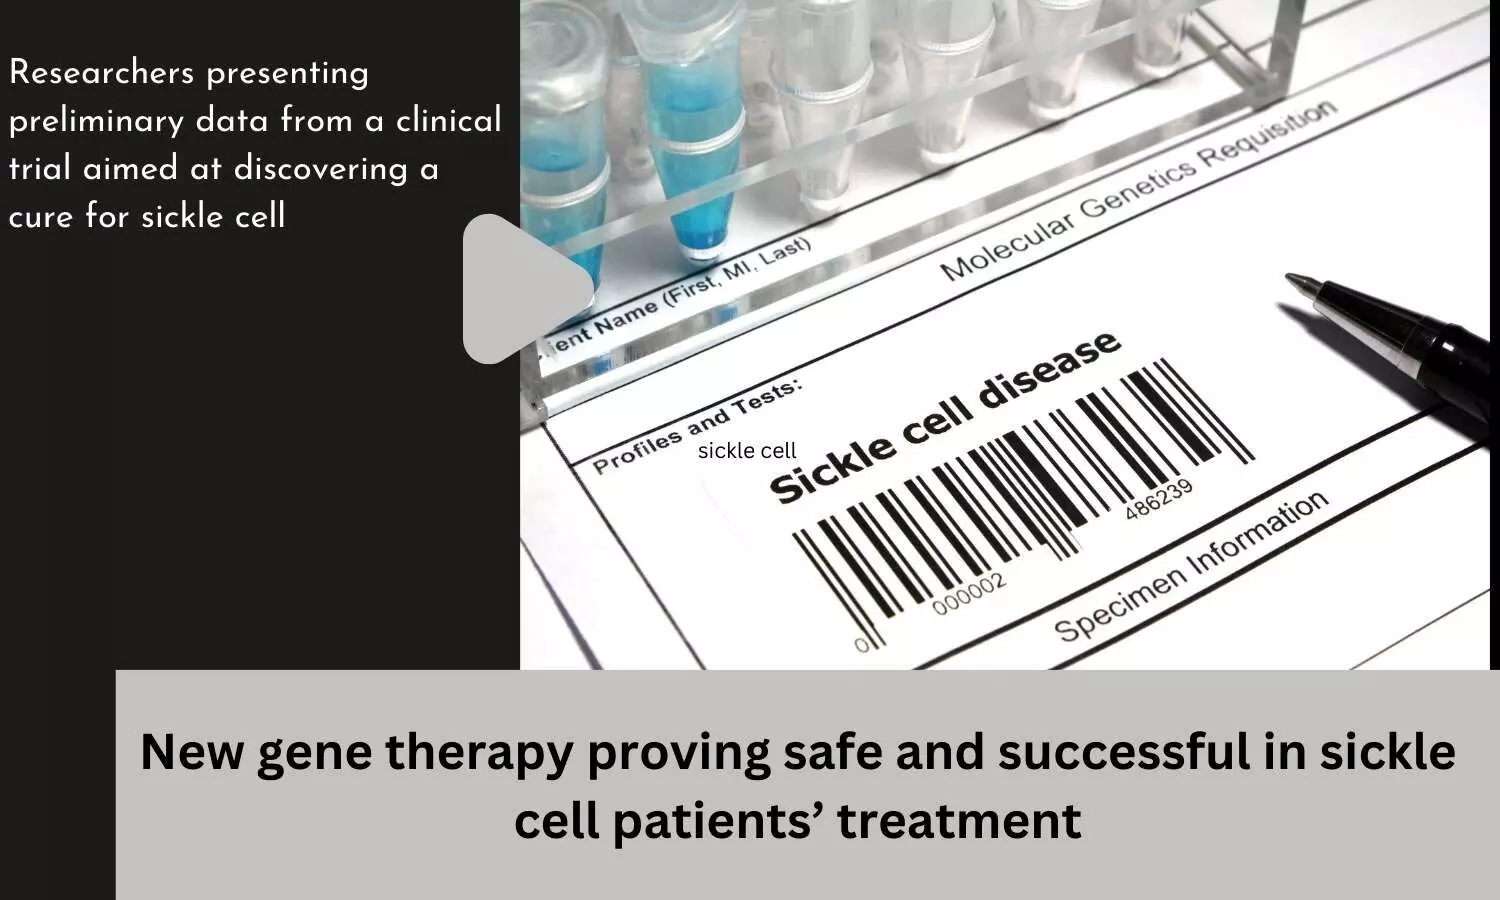 New gene therapy proving safe and successful in sickle cell patients treatment